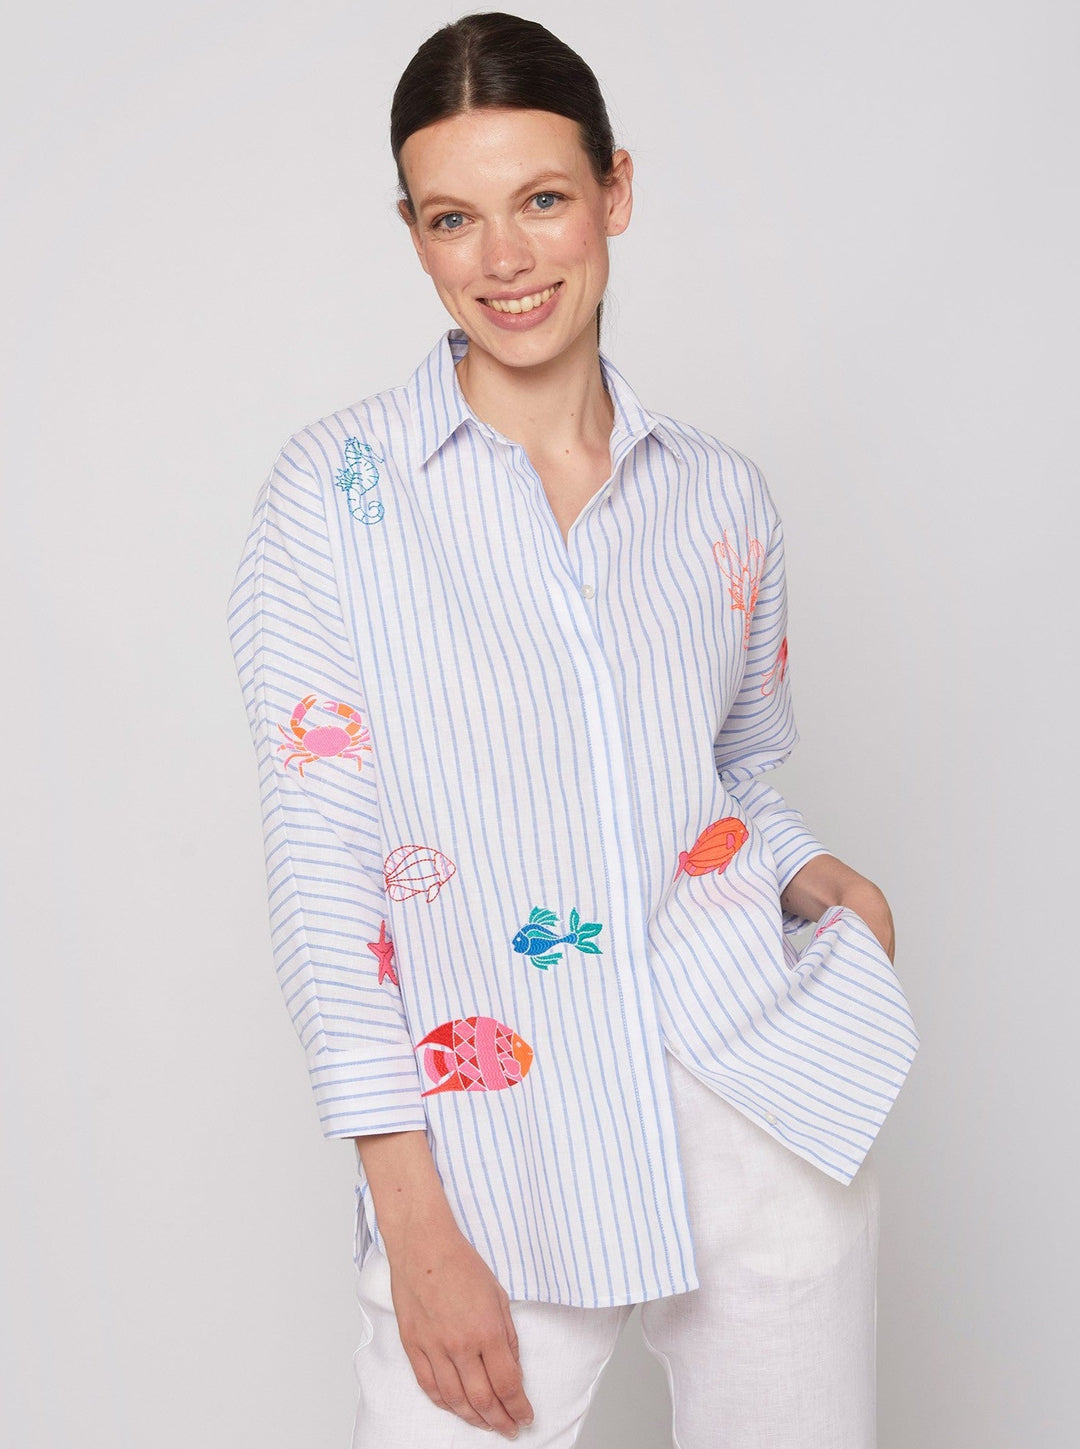 Vilagallo Top Louisa Shirt in Embroidered Blue Linen Stripe